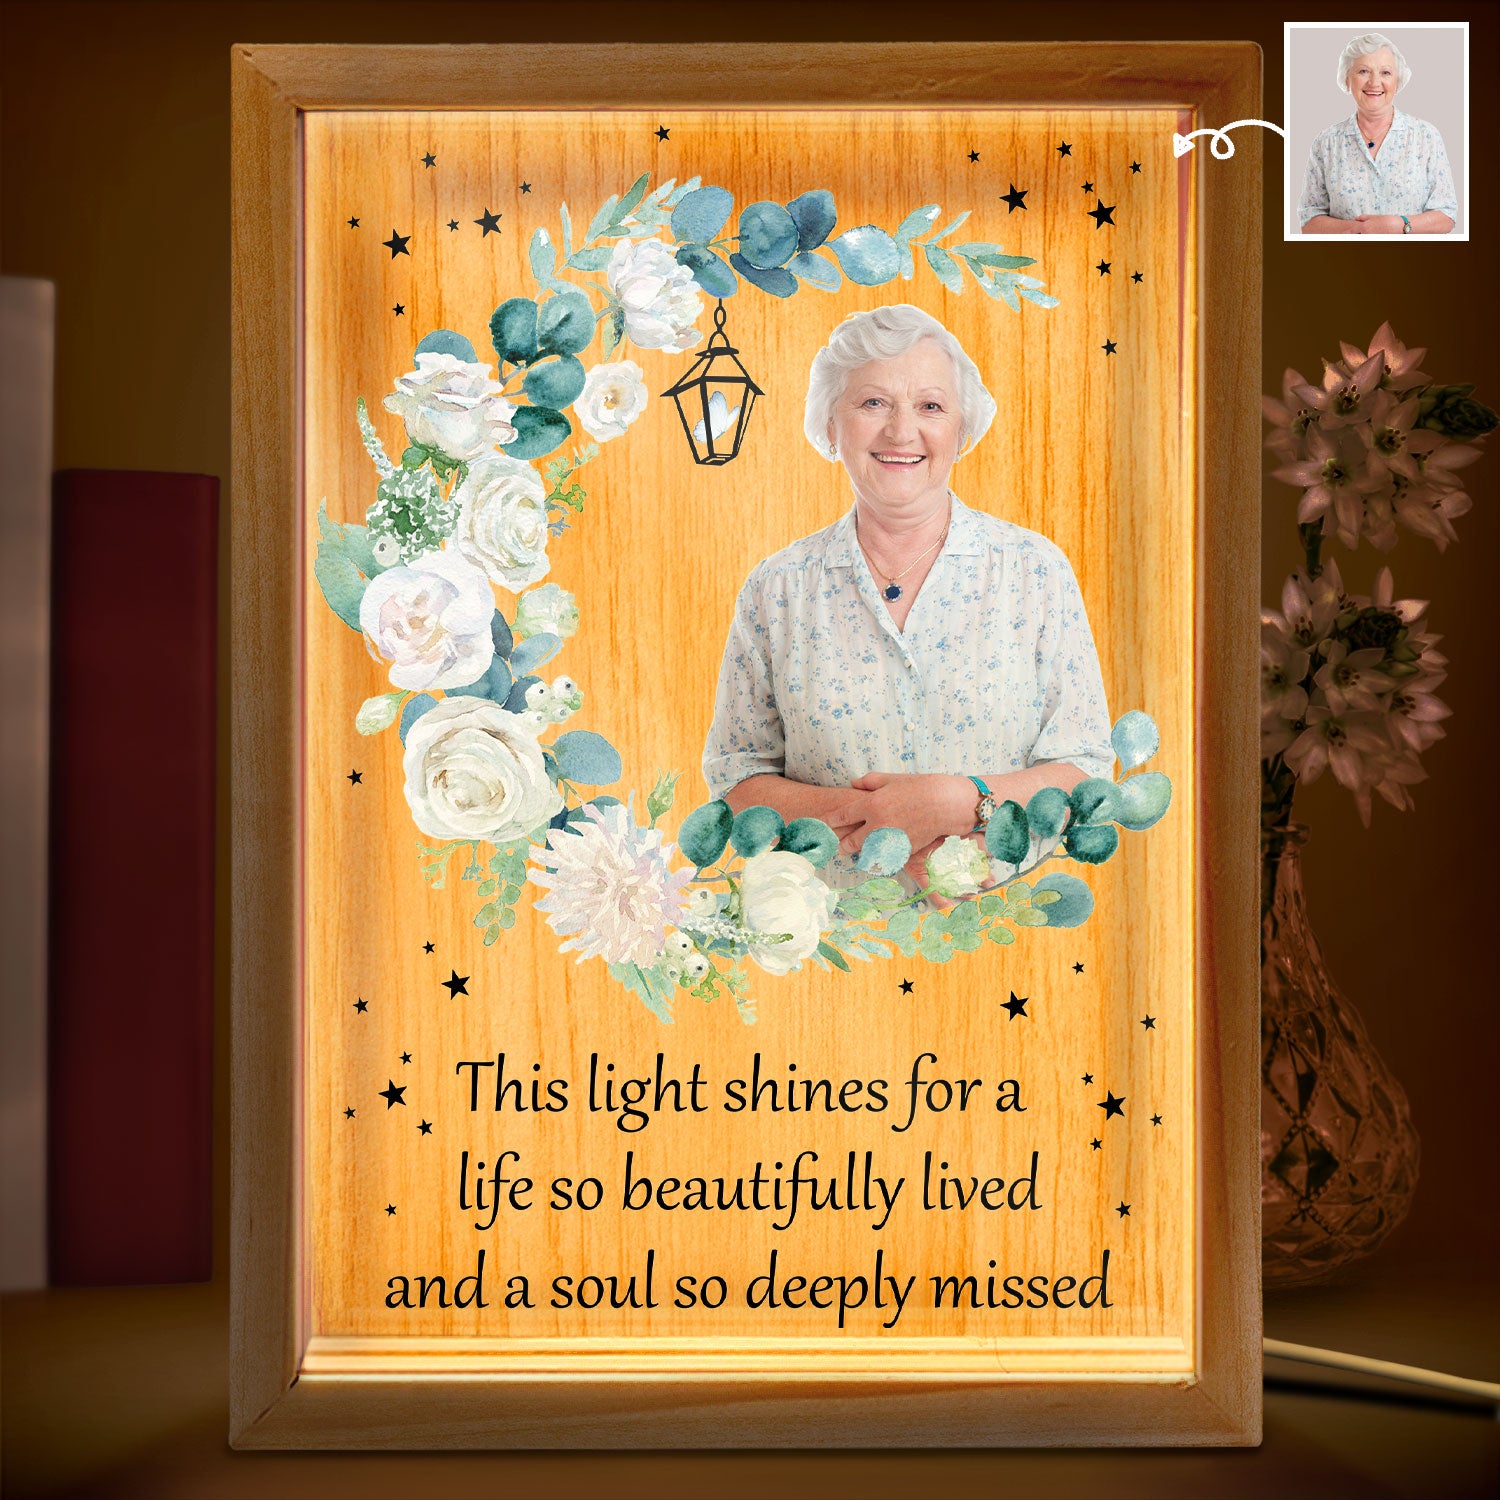 Custom Photo Shines For A Life So Beautifully Lived - Loving, Memorial Gift For Family, Siblings, Friends - Personalized Picture Frame Light Box